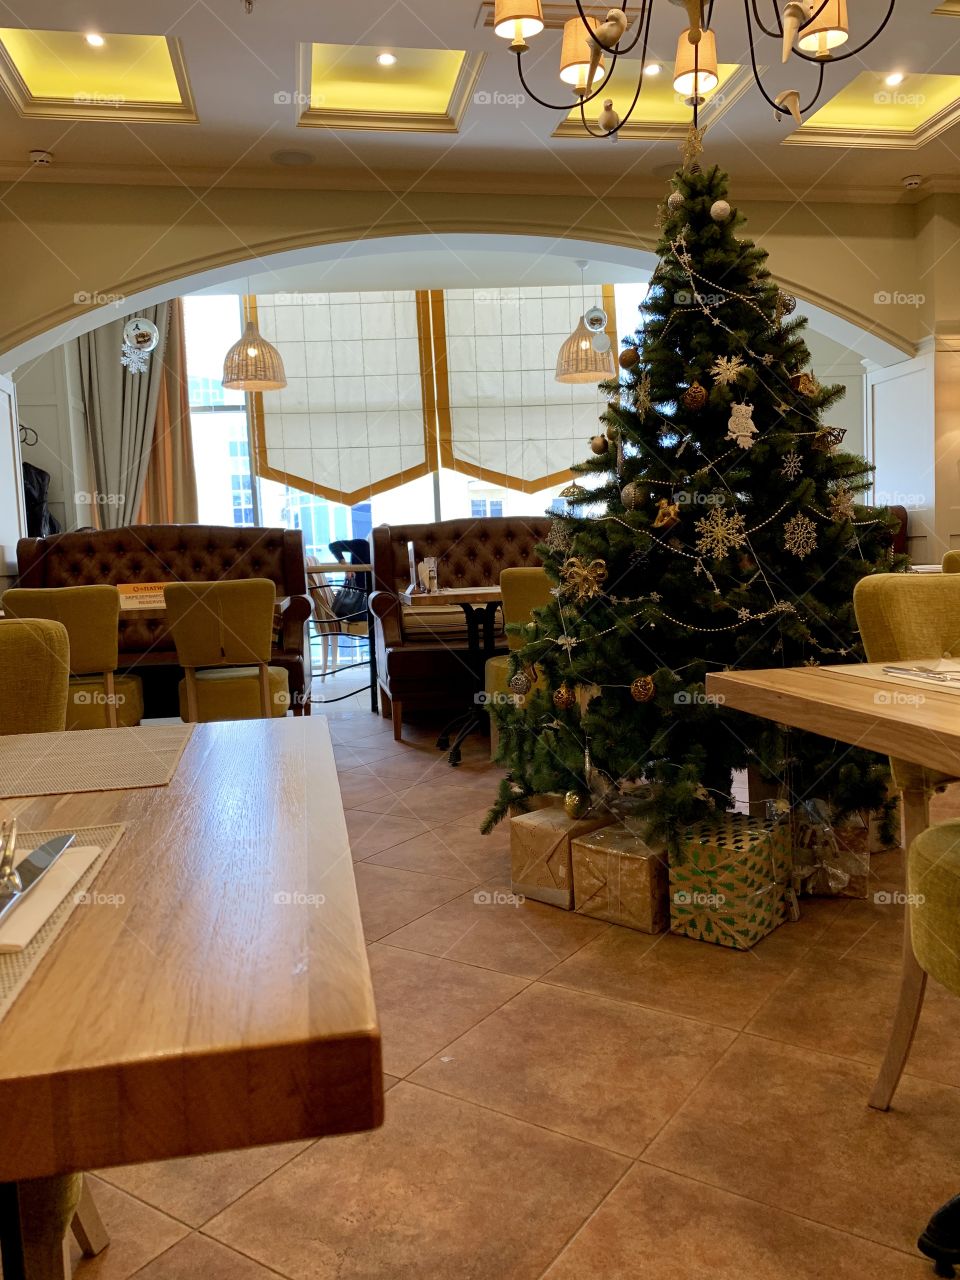 Christmas tree in a cafe